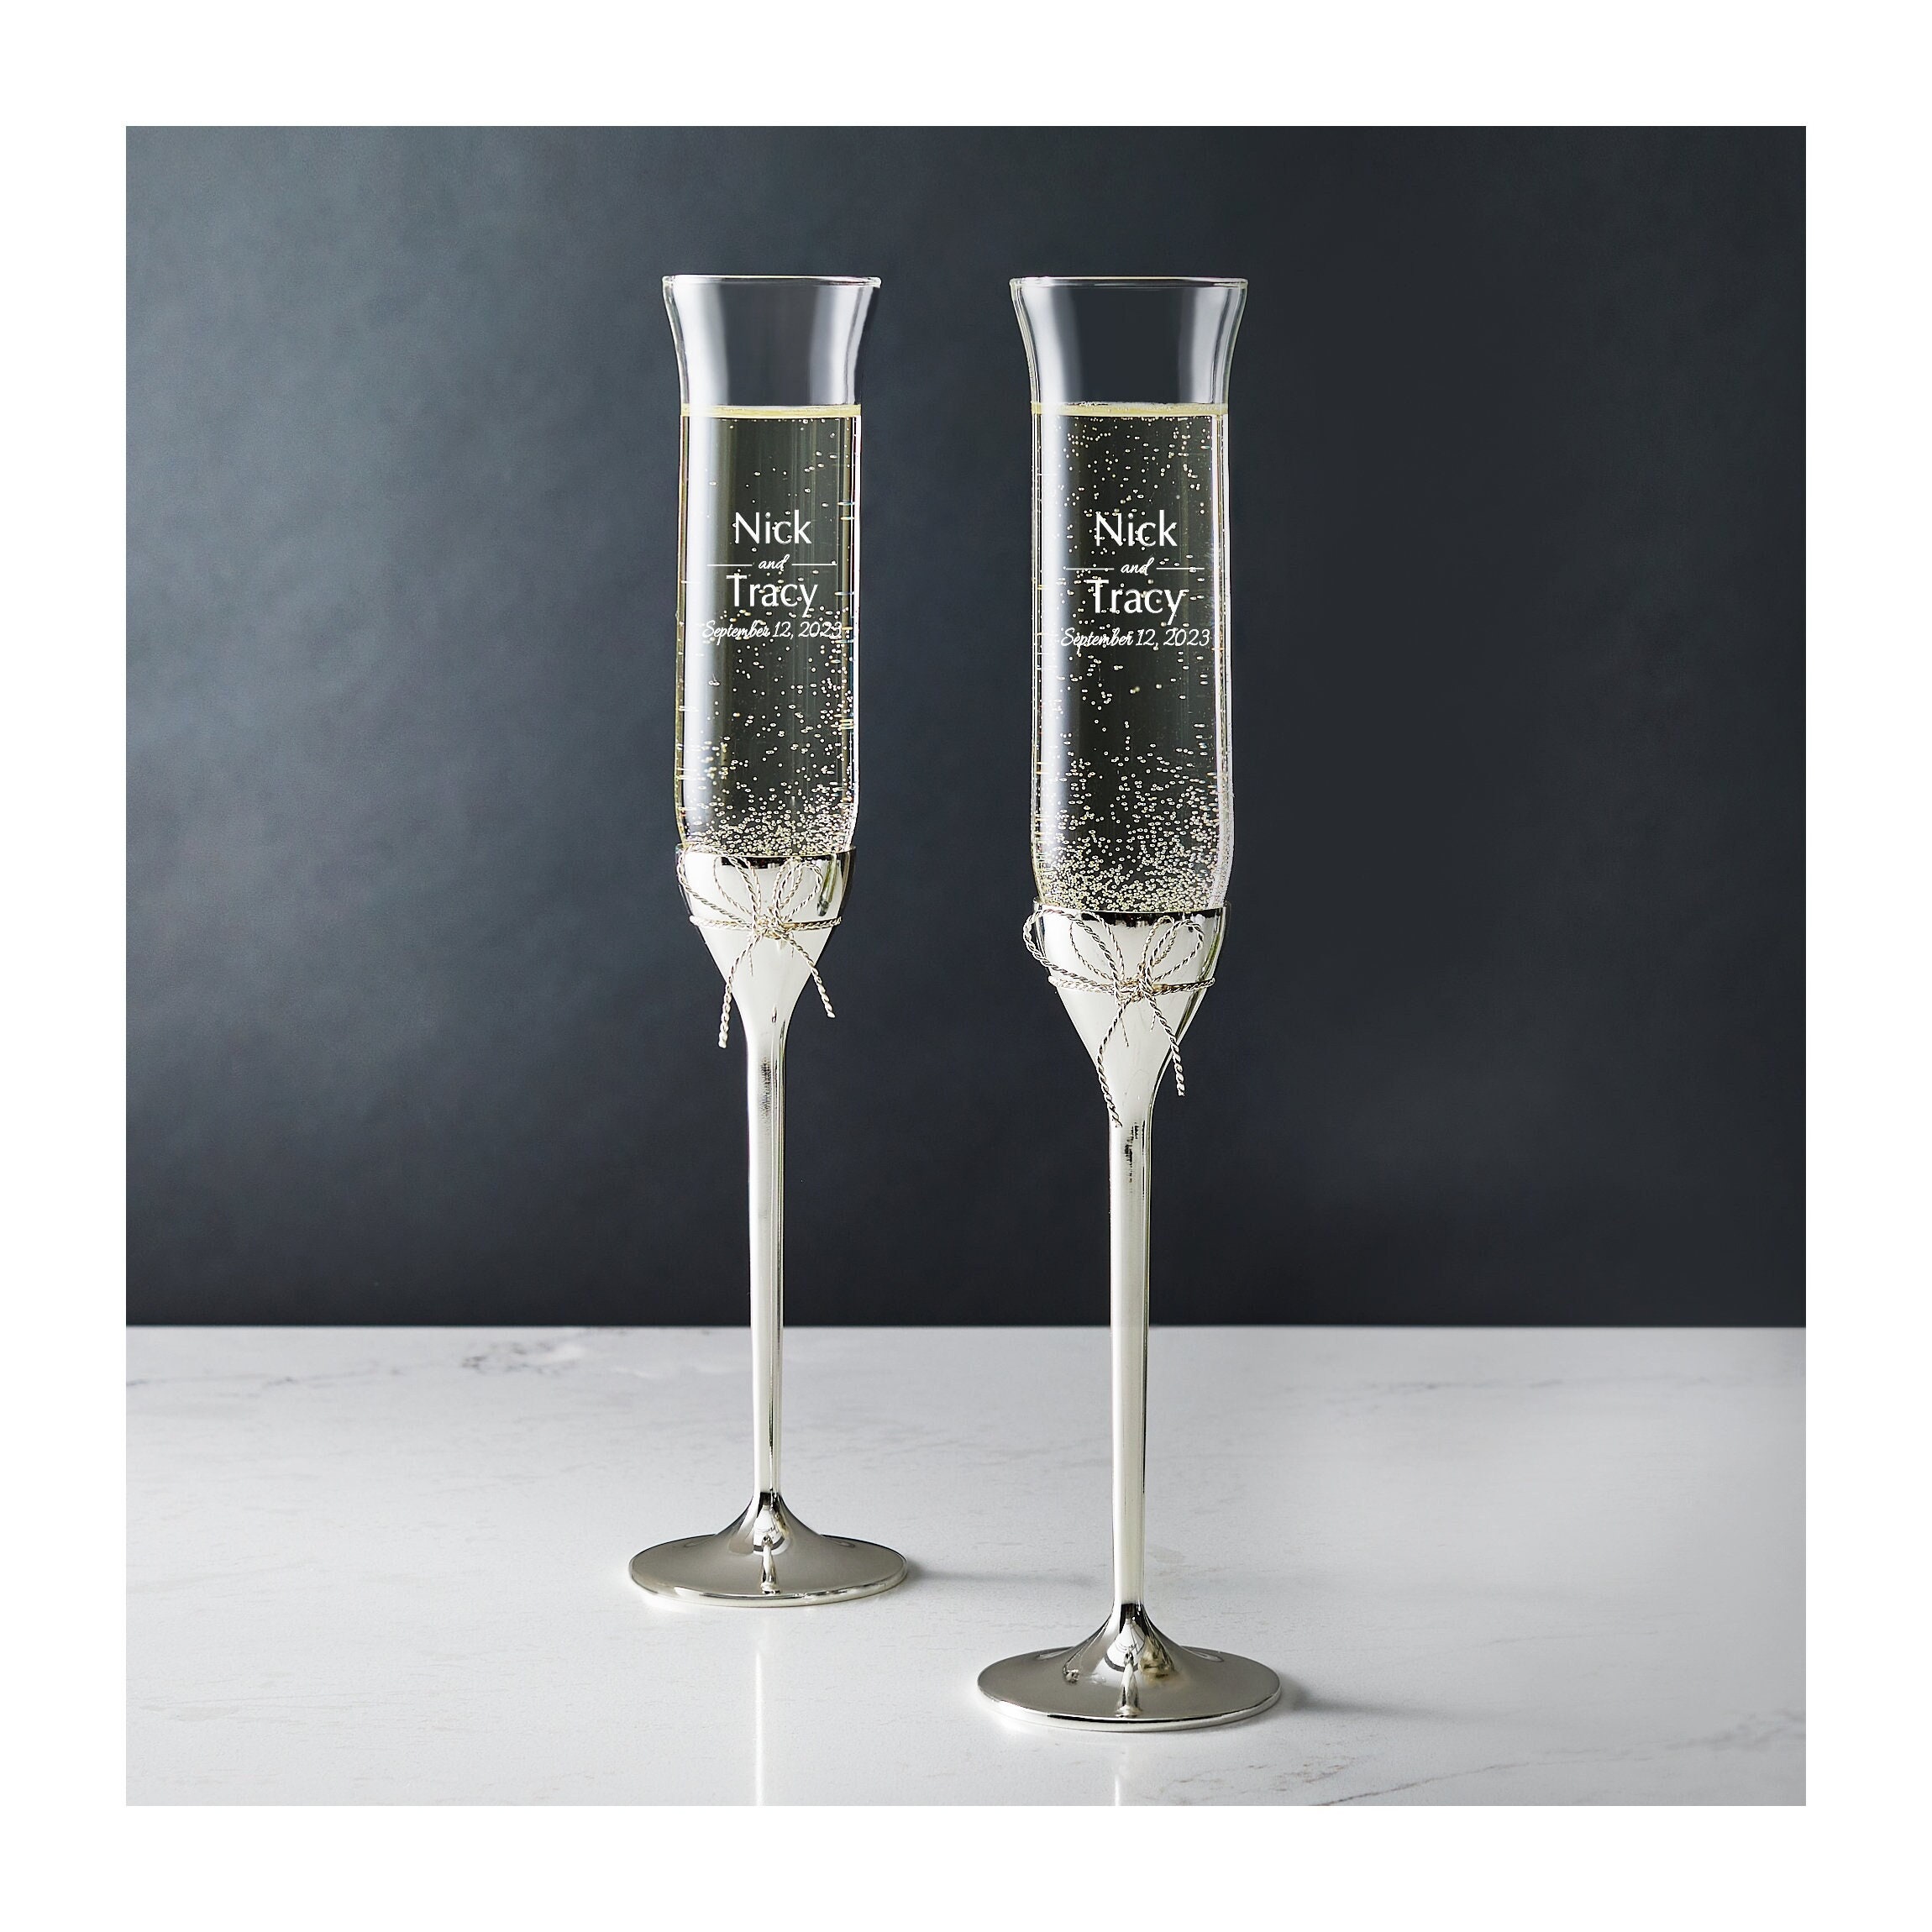 Etched Anniversary Reed and Barton Crystal Champagne Flute Set